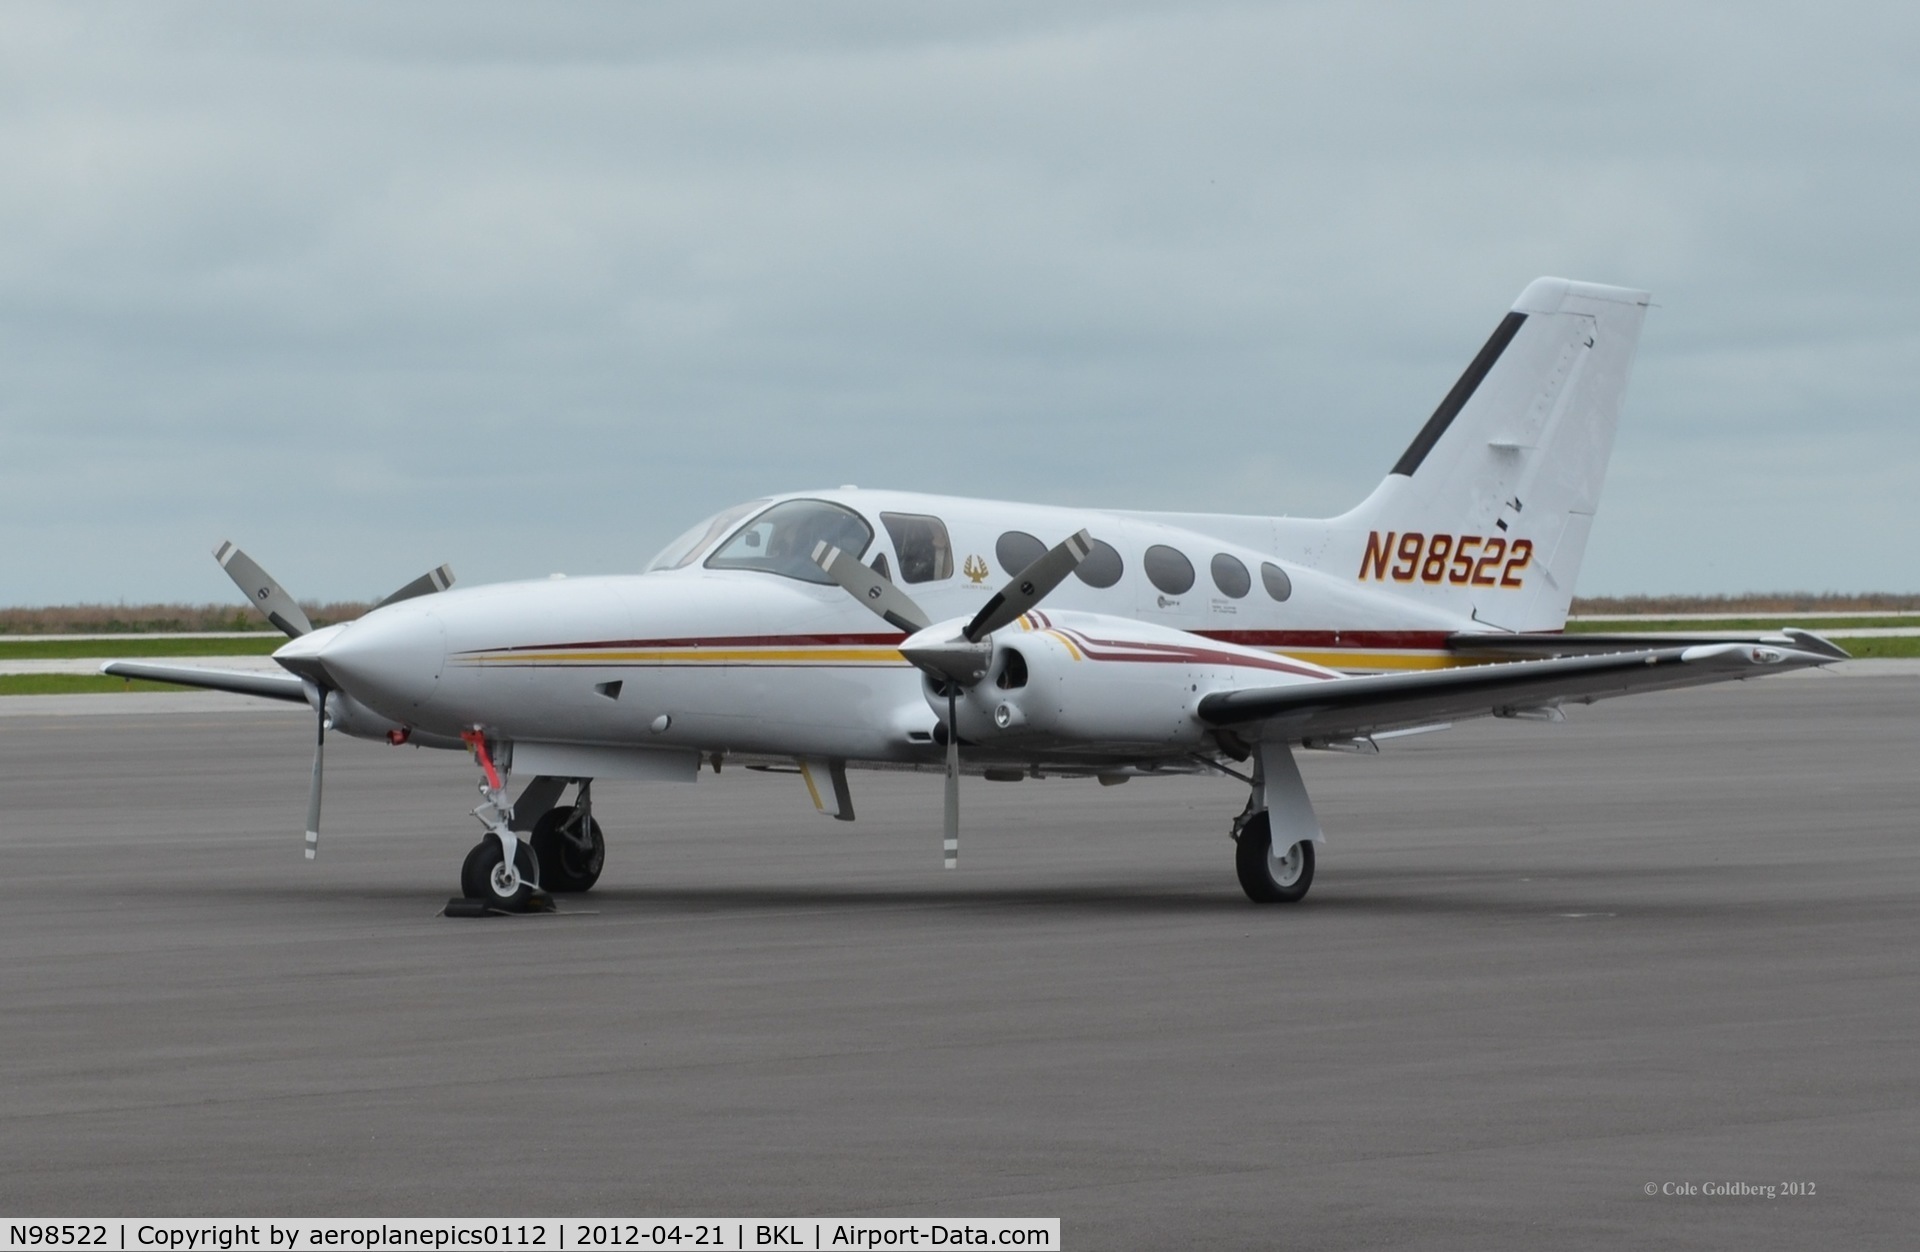 N98522, 1976 Cessna 421C Golden Eagle C/N 421C0081, N98522 seen on a cloudy day at KBKL.